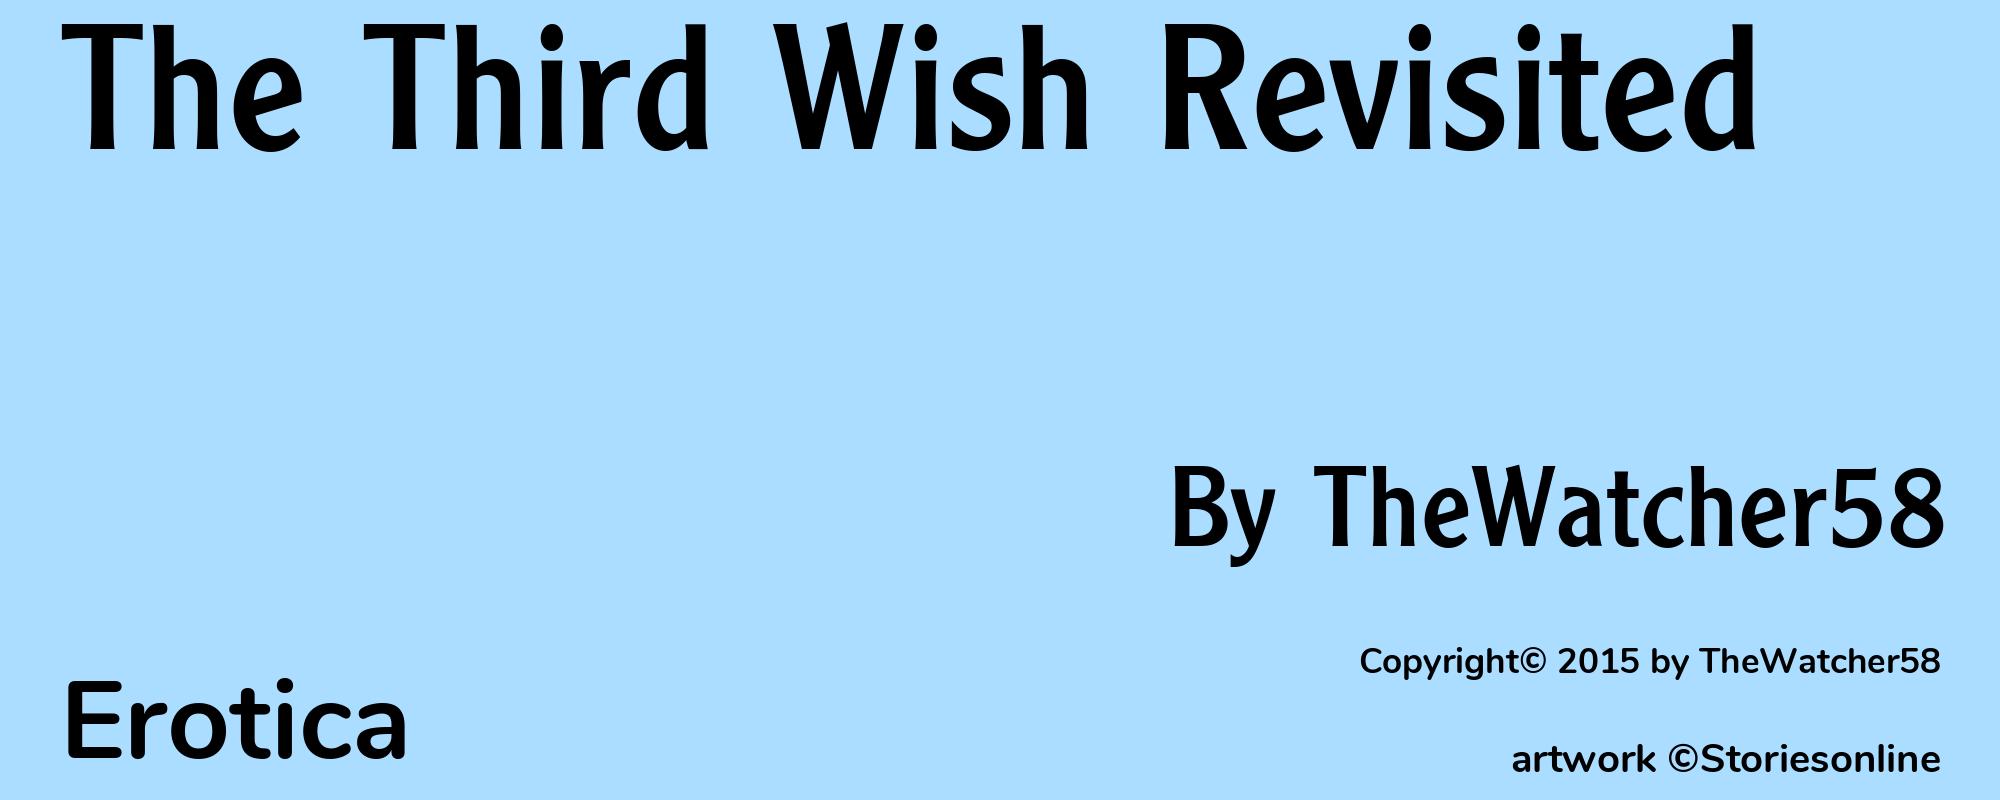 The Third Wish Revisited - Cover